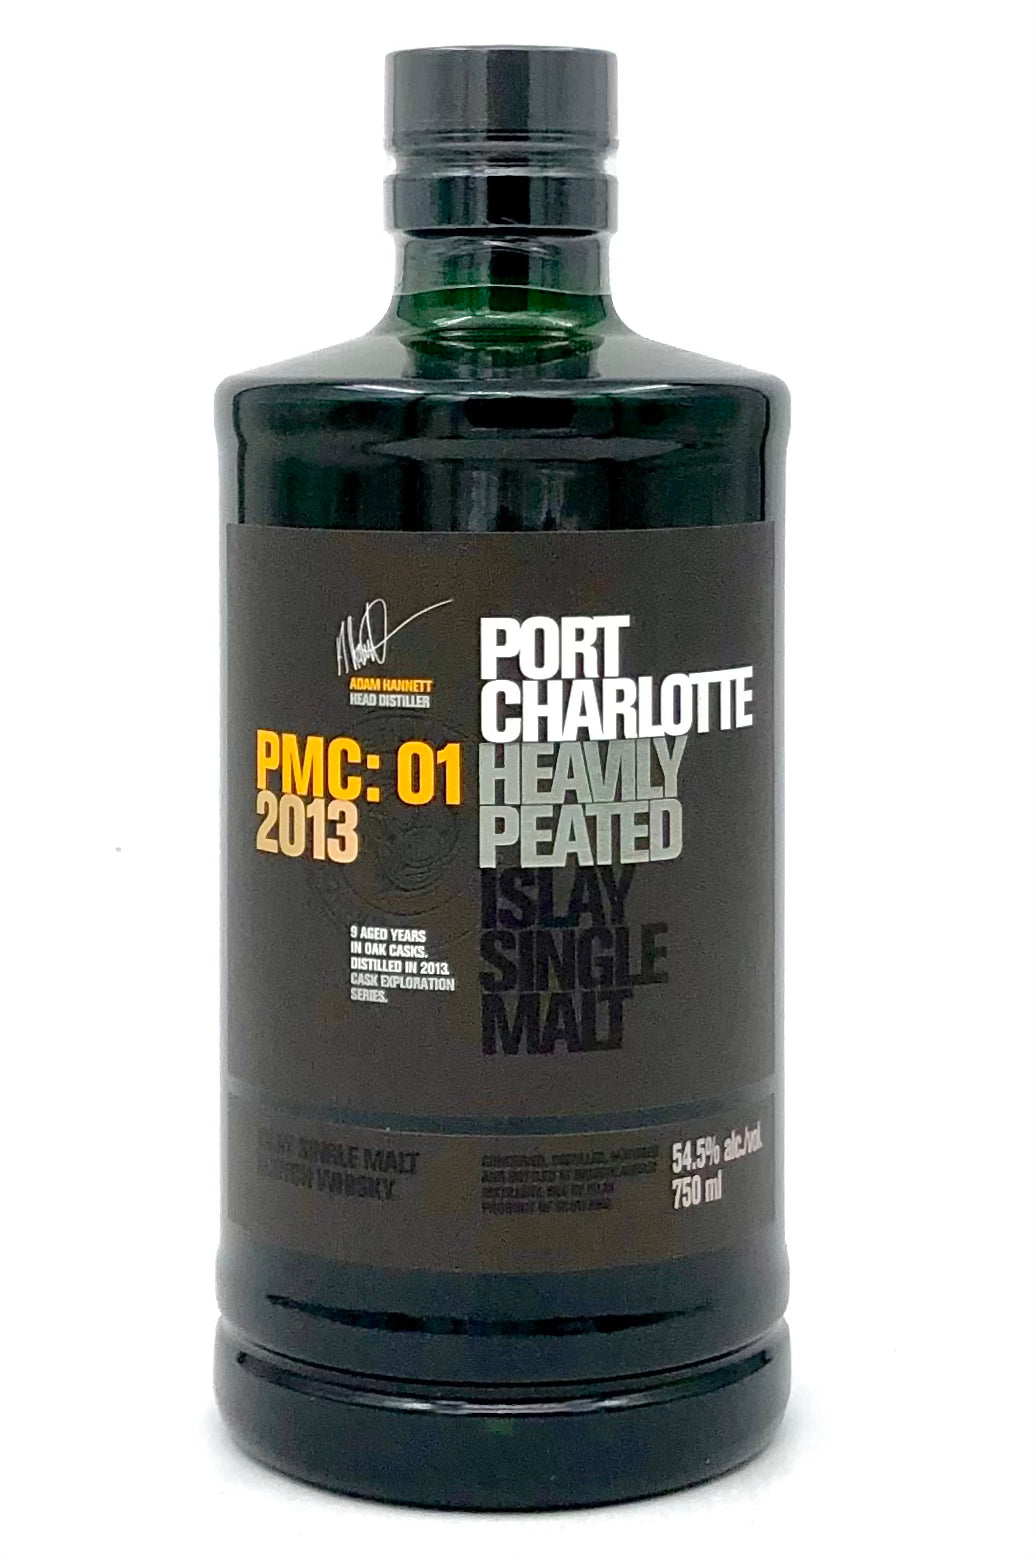 Bruichladdich Port Charlotte PMC:01 Vintage 2013 Heavily Peated Scotch Whisky